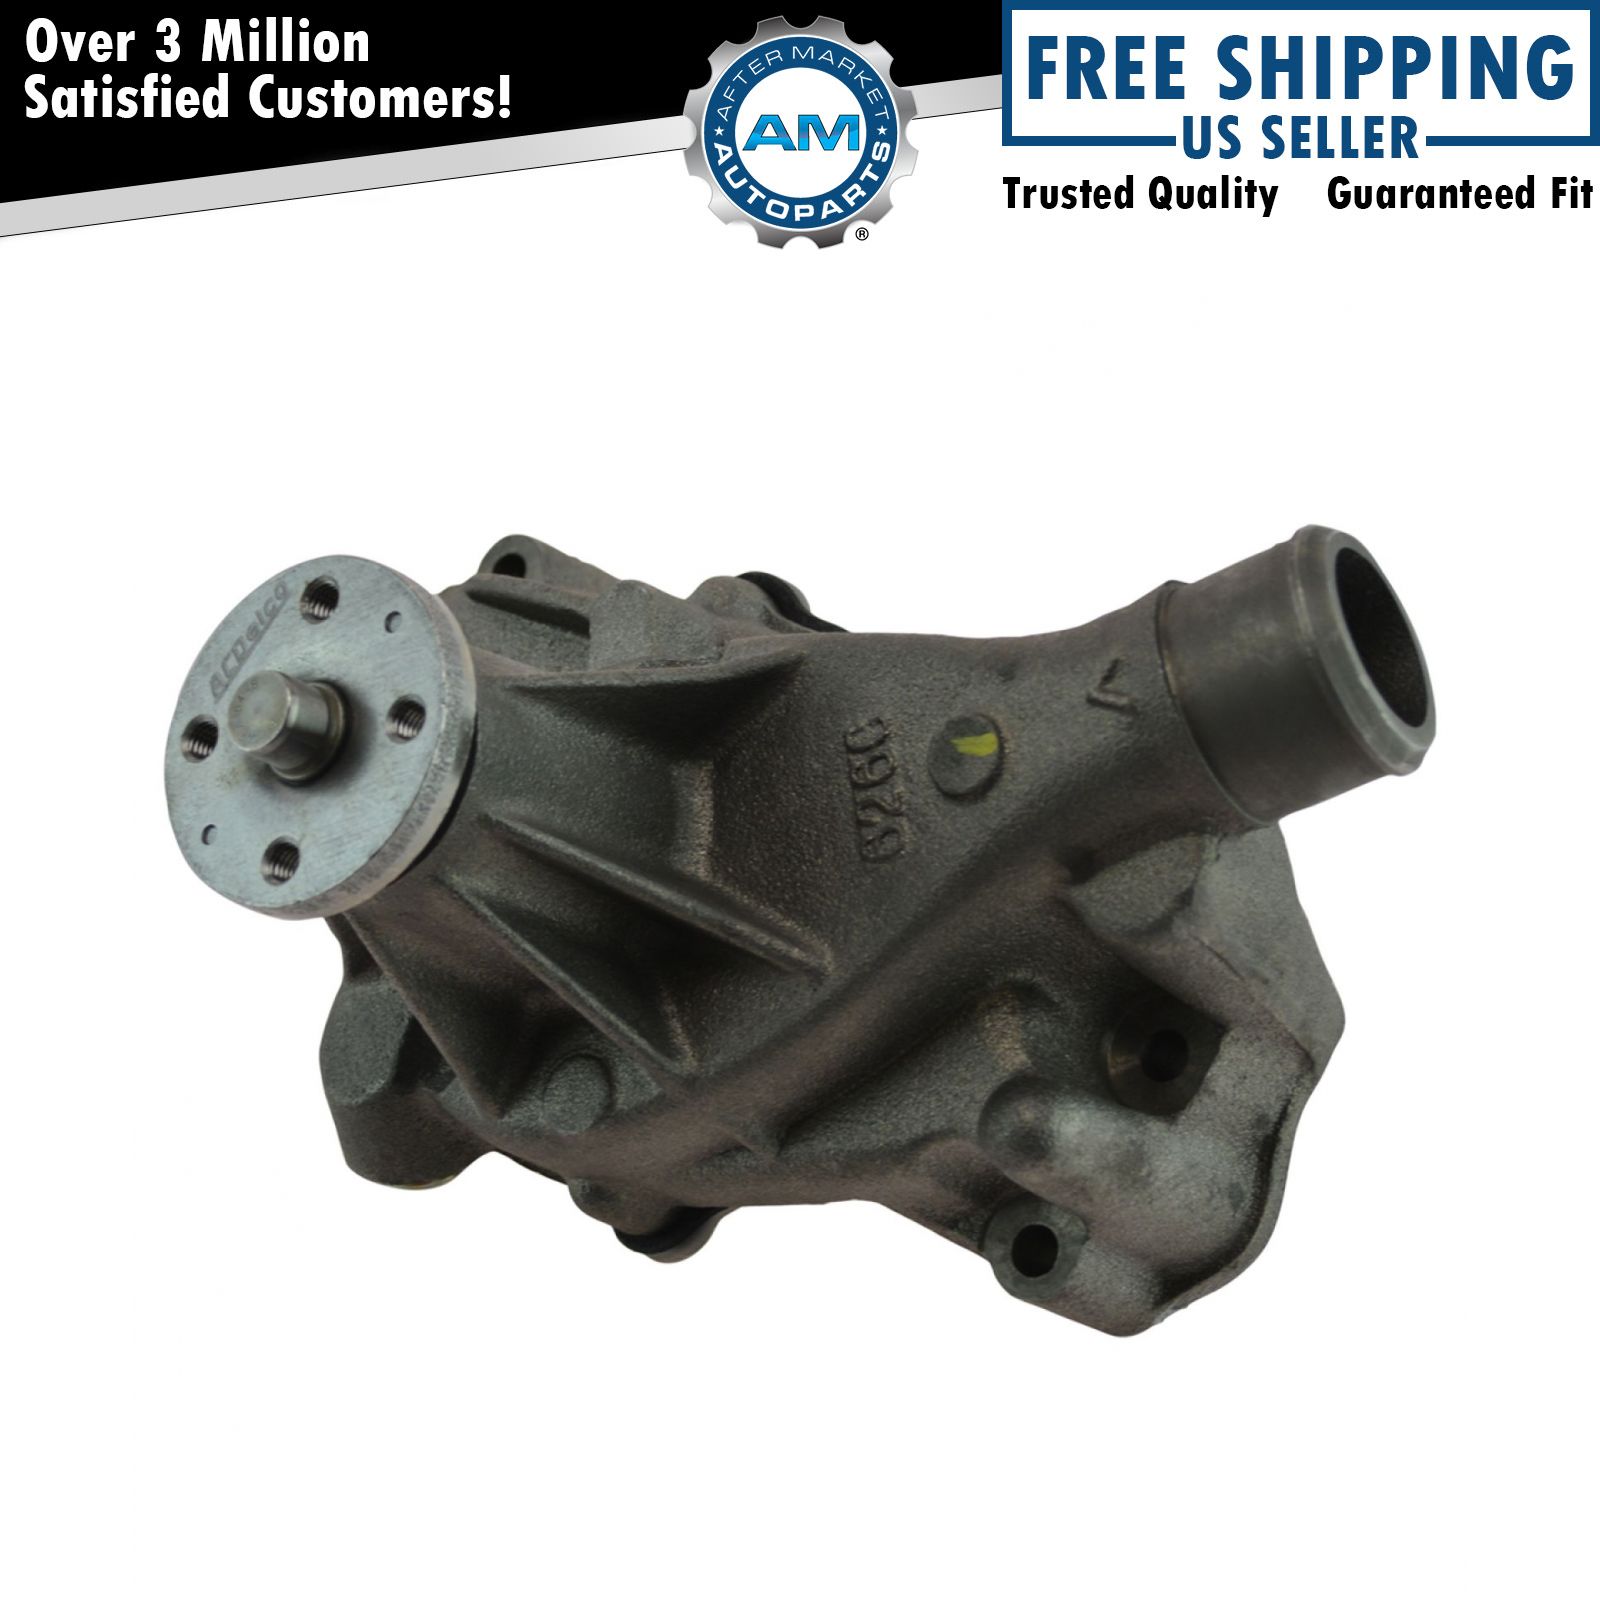 AC Delco Professional Series 252-719 Engine Water Pump for Cadillac Chevy GMC